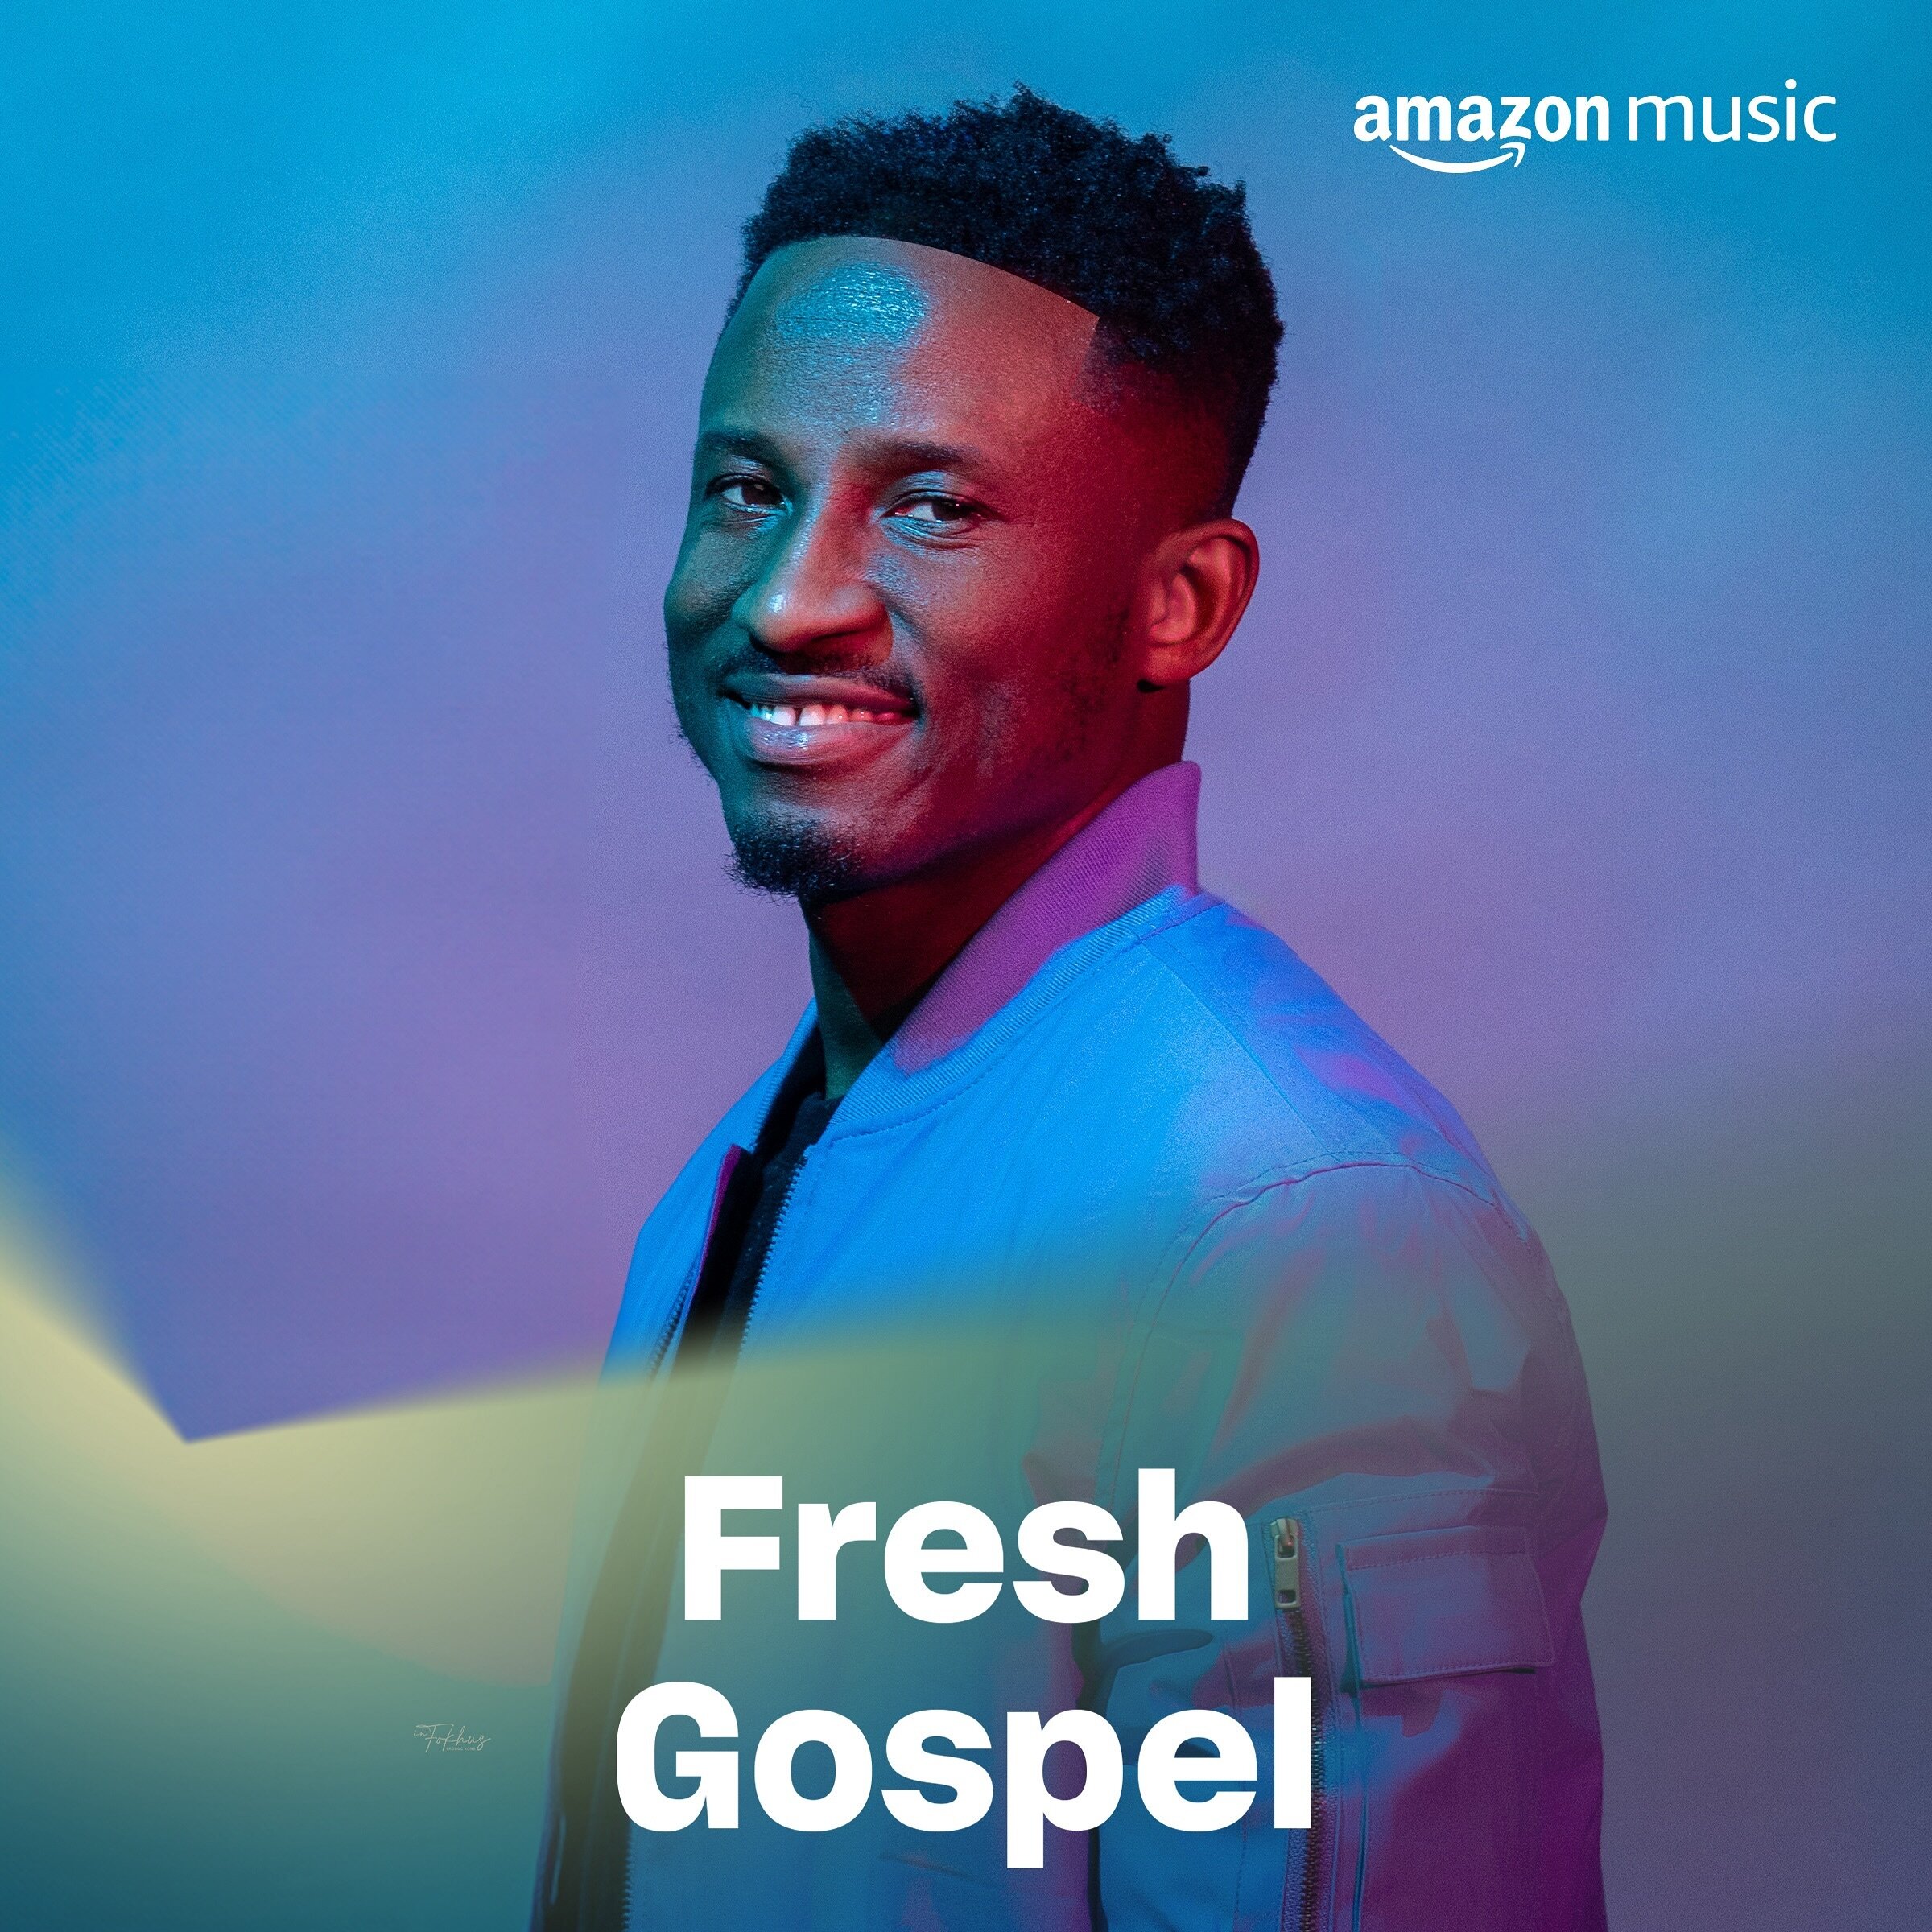 Thanks to our friends at @amazonmusic for featuring @daniel_psalmist on the cover of Fresh Gospel 🙌🏼

We get so encouraged every time hard working independent artists like Daniel get this sort of recognition from the likes of Amazon Music, who have